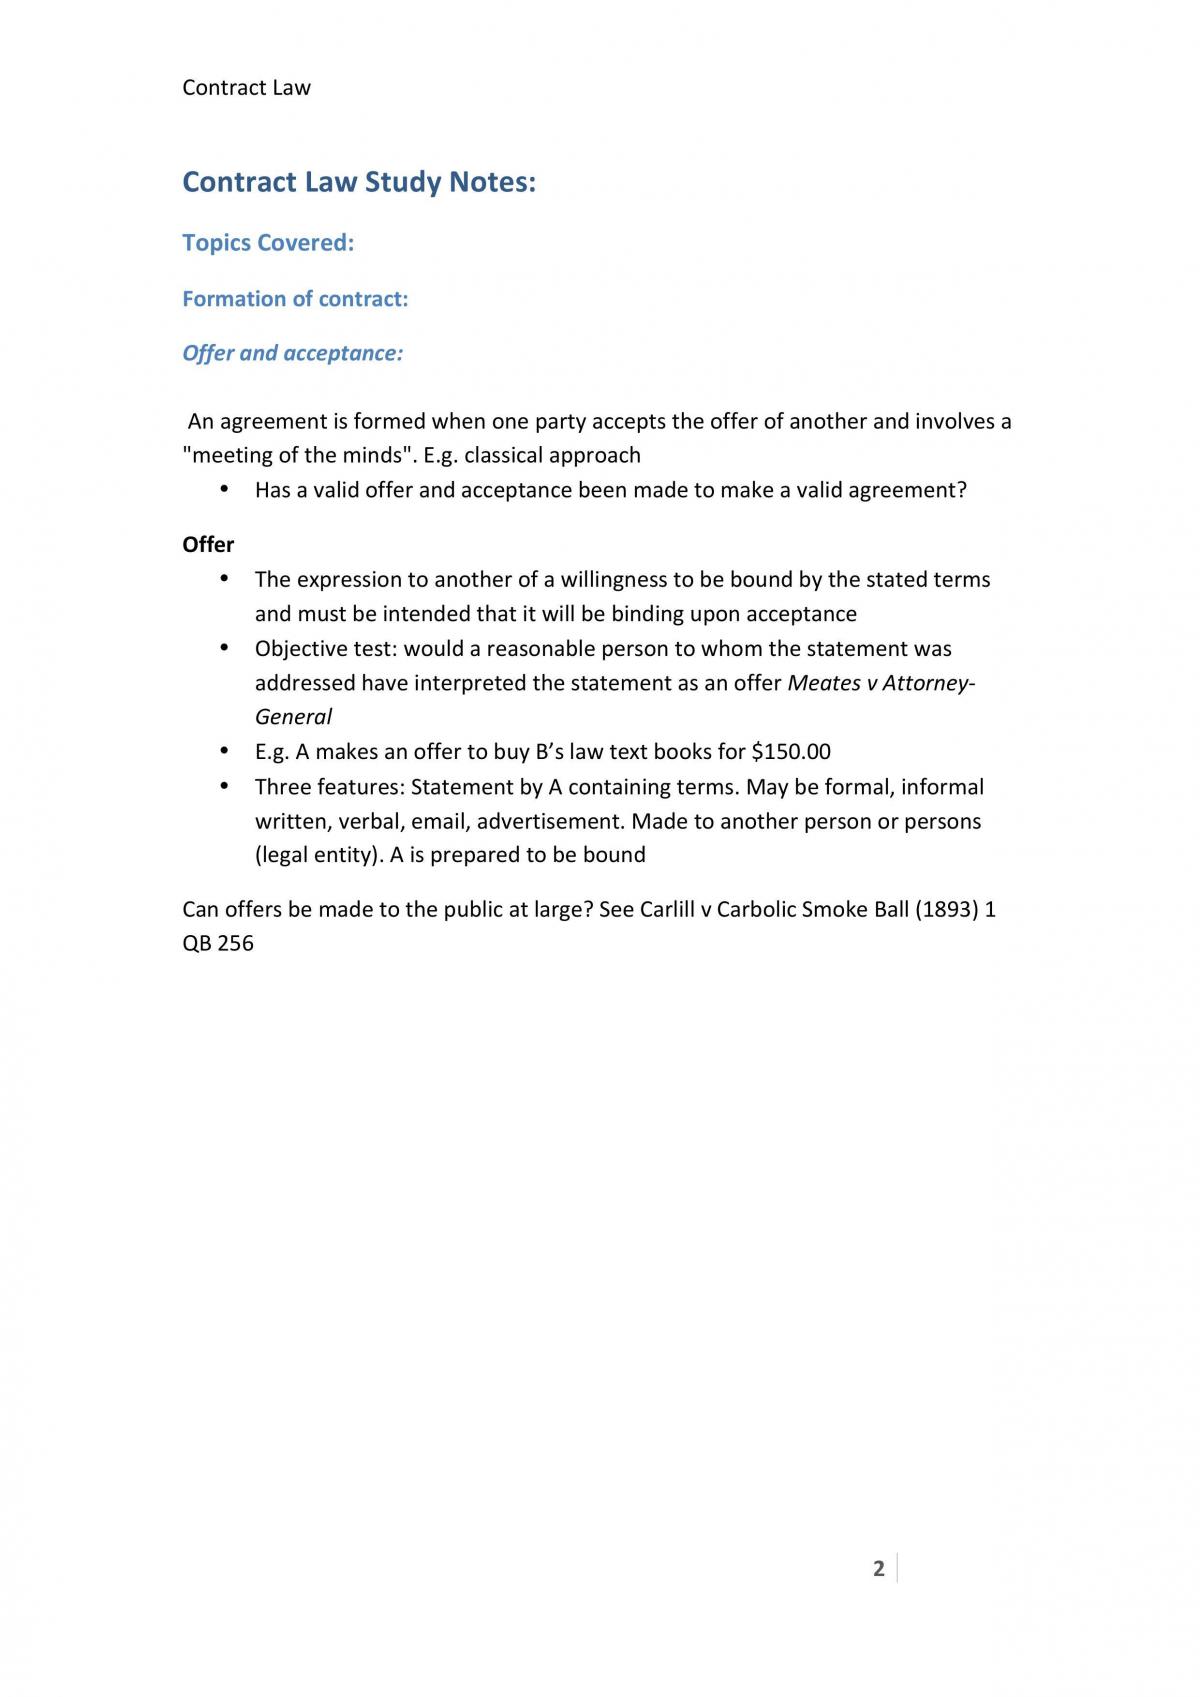 Contract Law full notes - Page 2